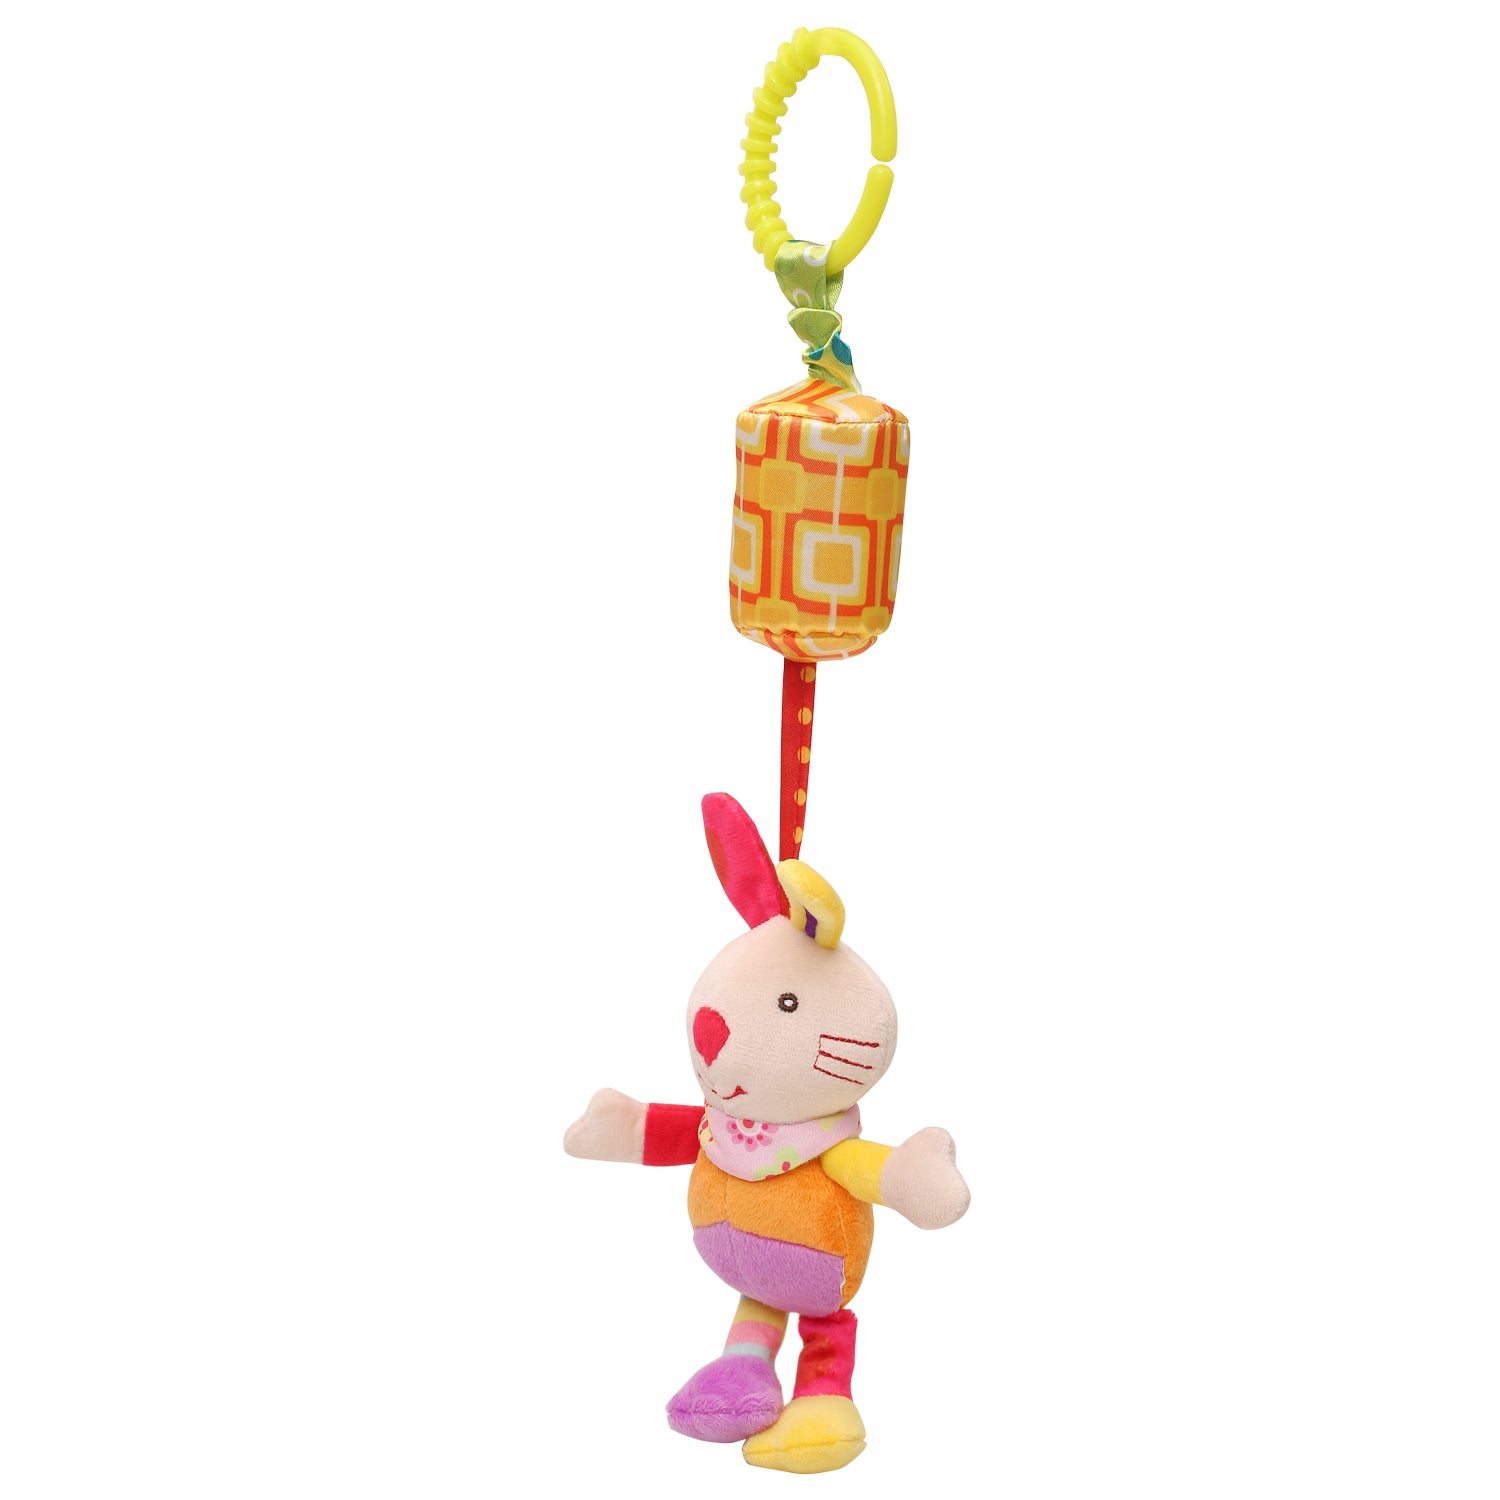 Rabbit Multicolour Wind Chime Hanging Toy - Baby Moo